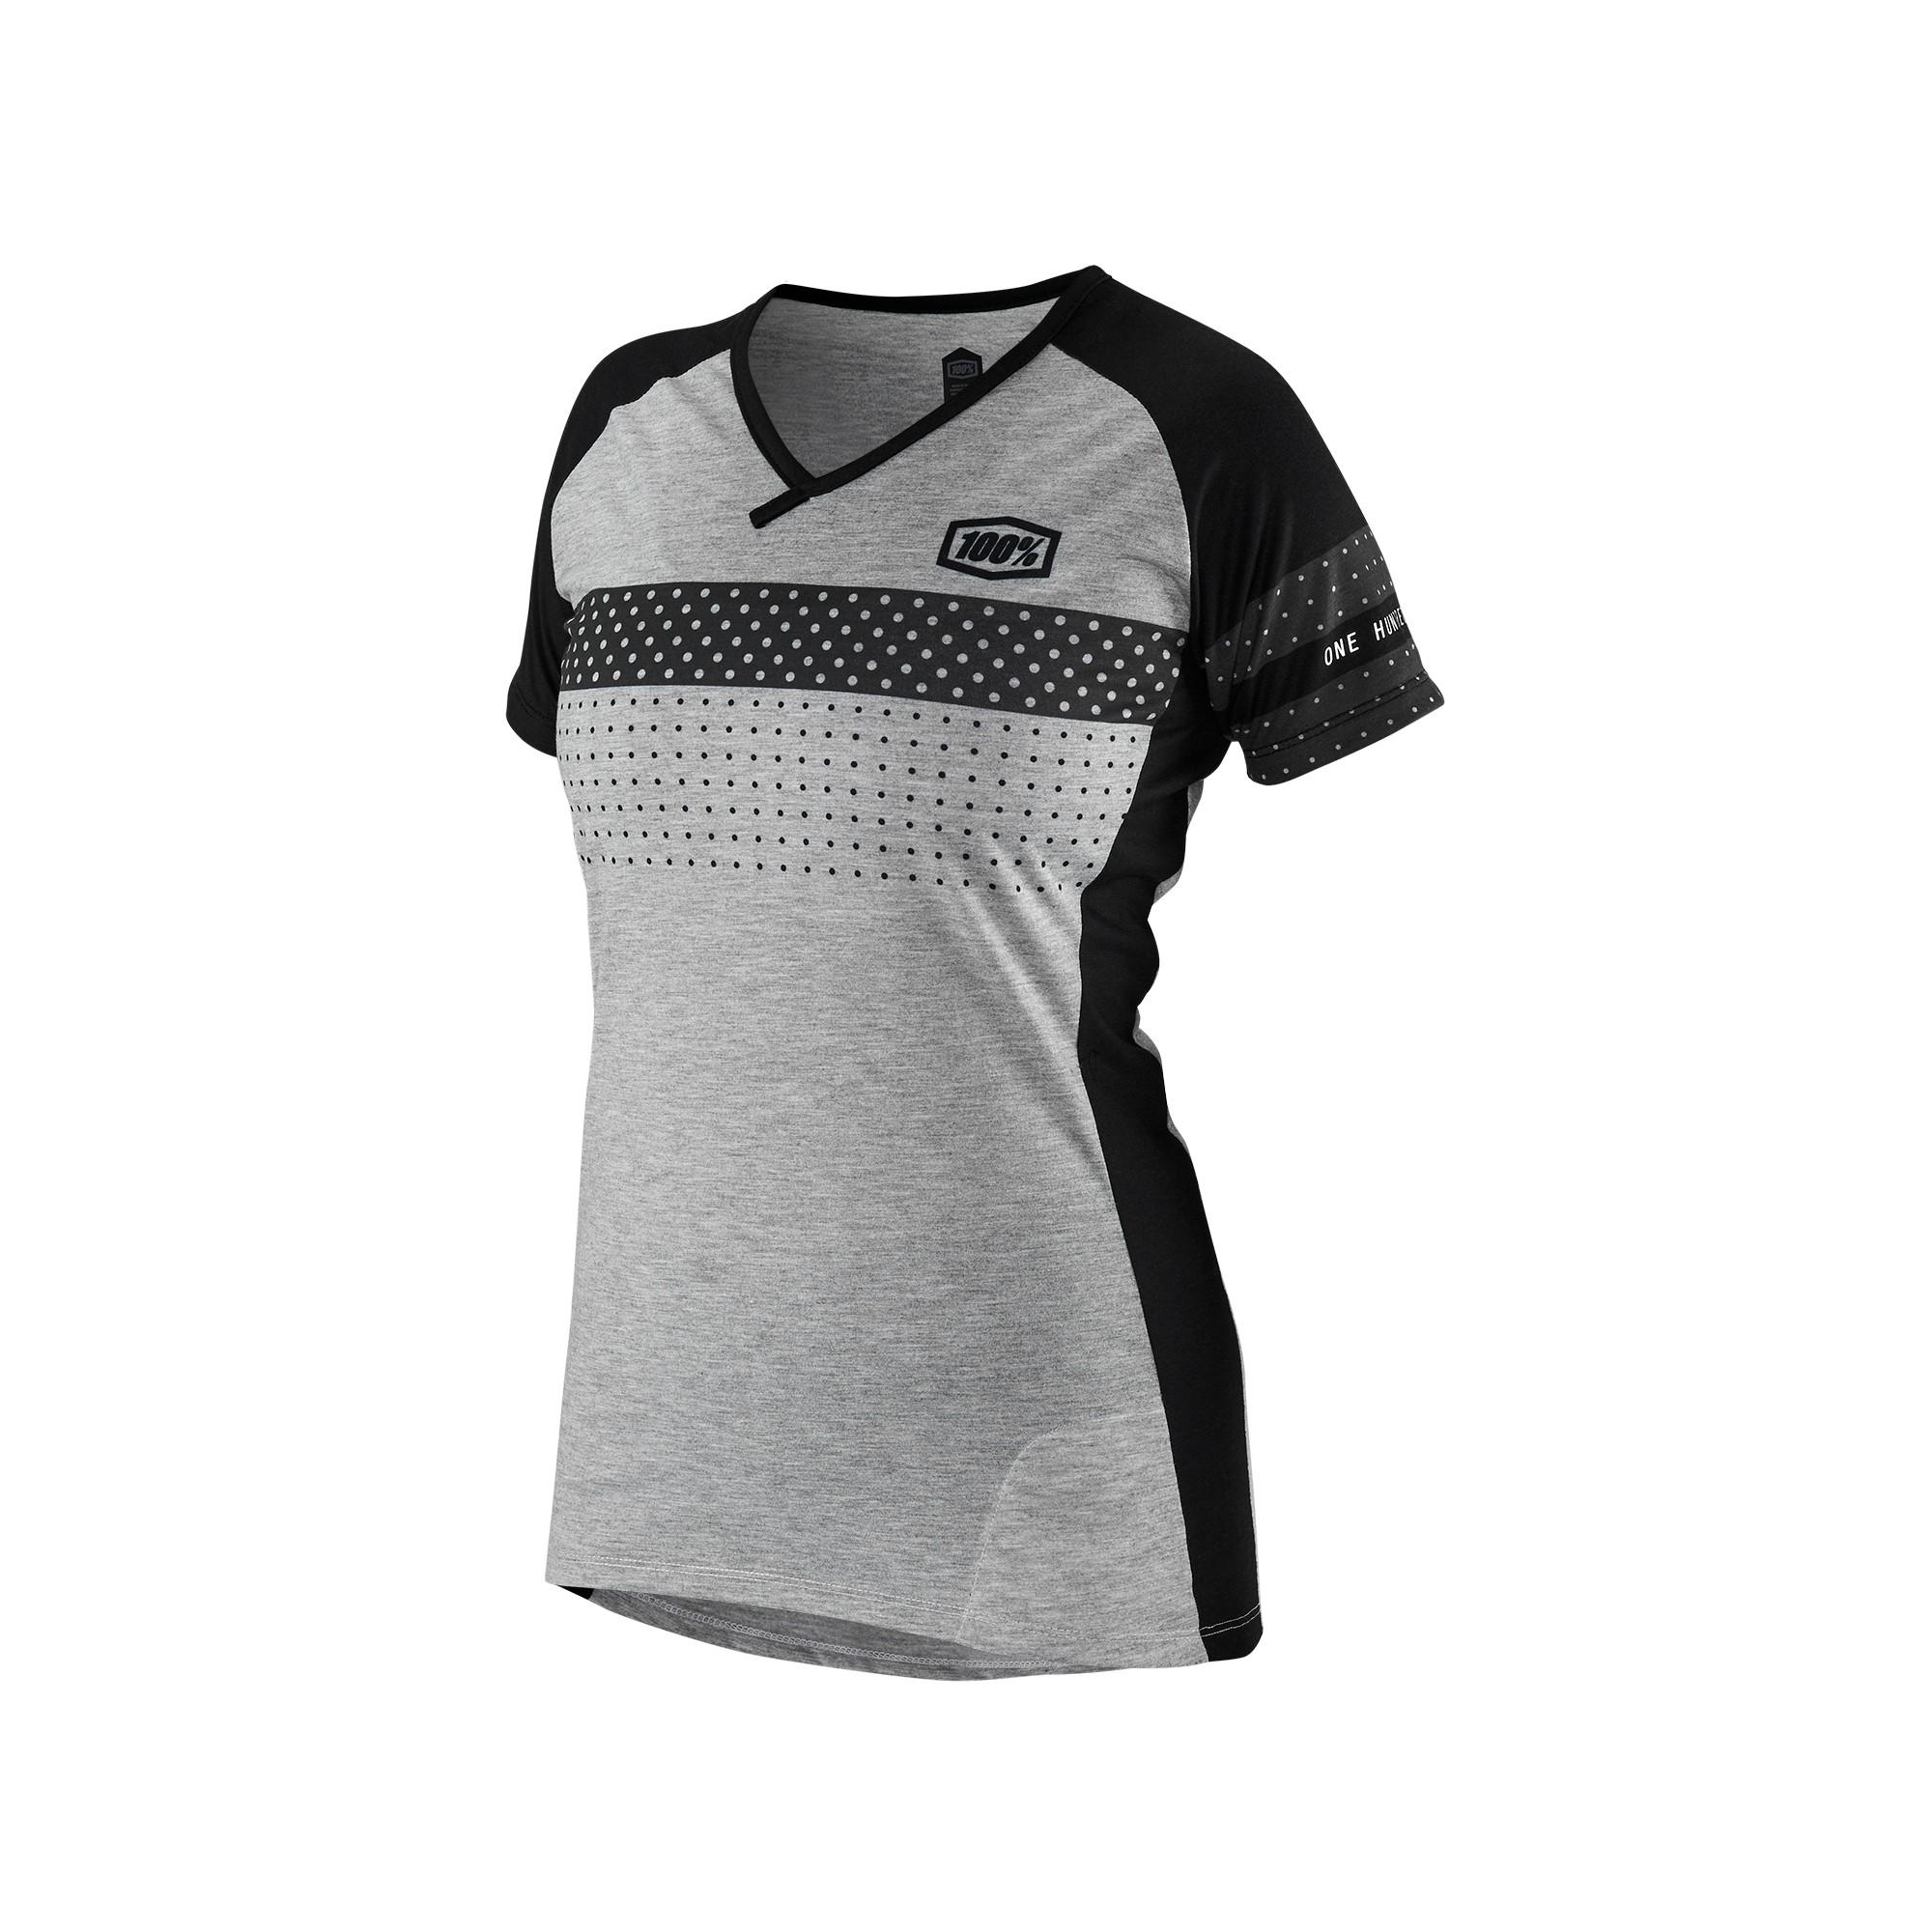 100% Womens Airmatic Jersey Ss19  Black